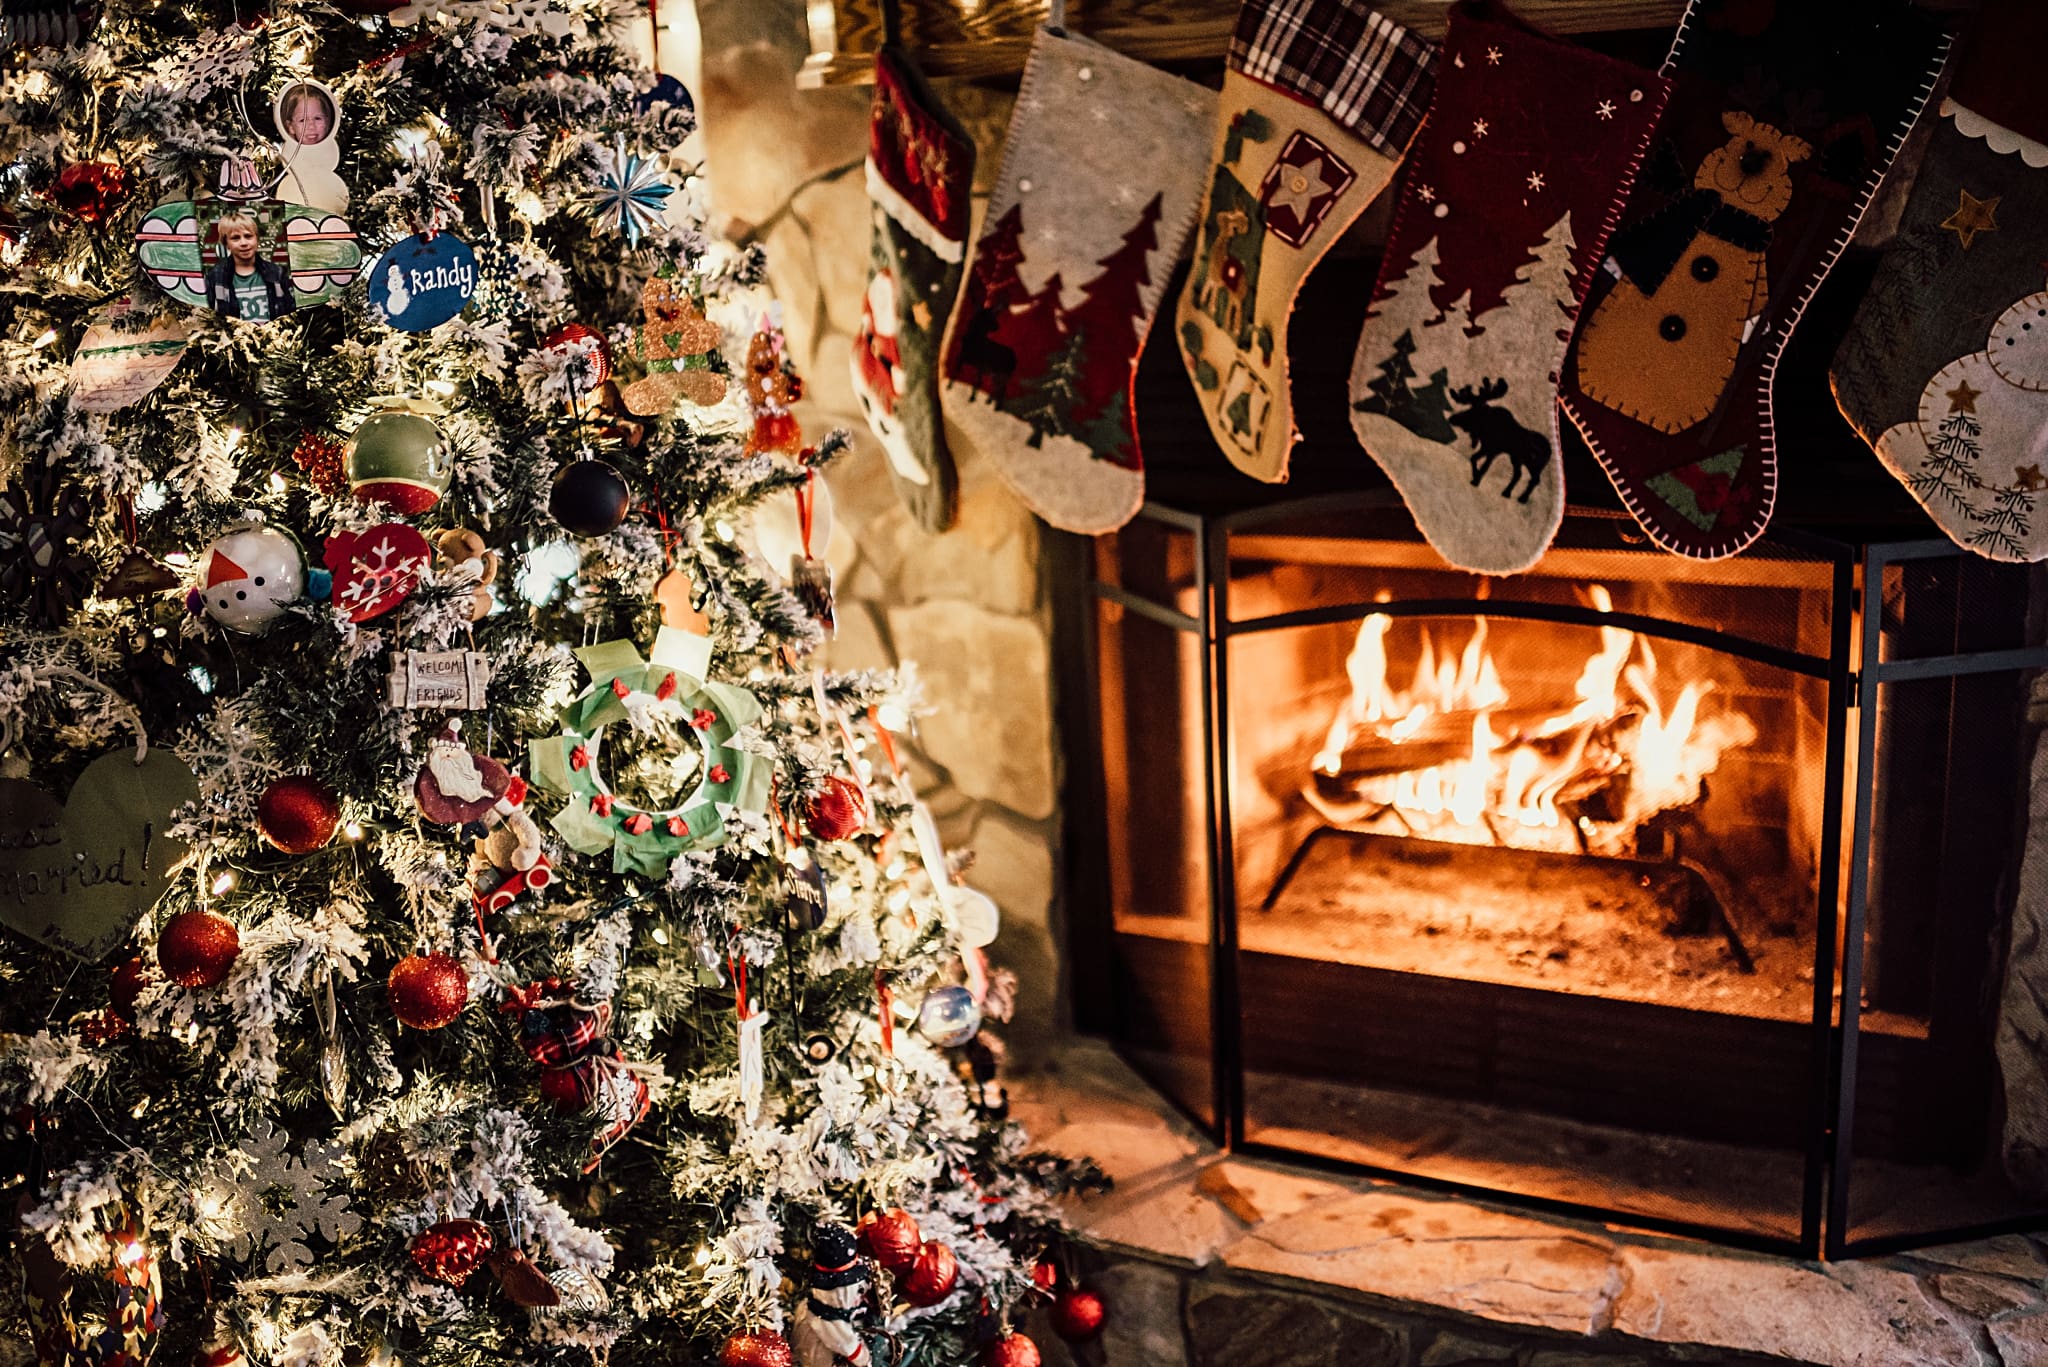 Christmas tree with a fireplace